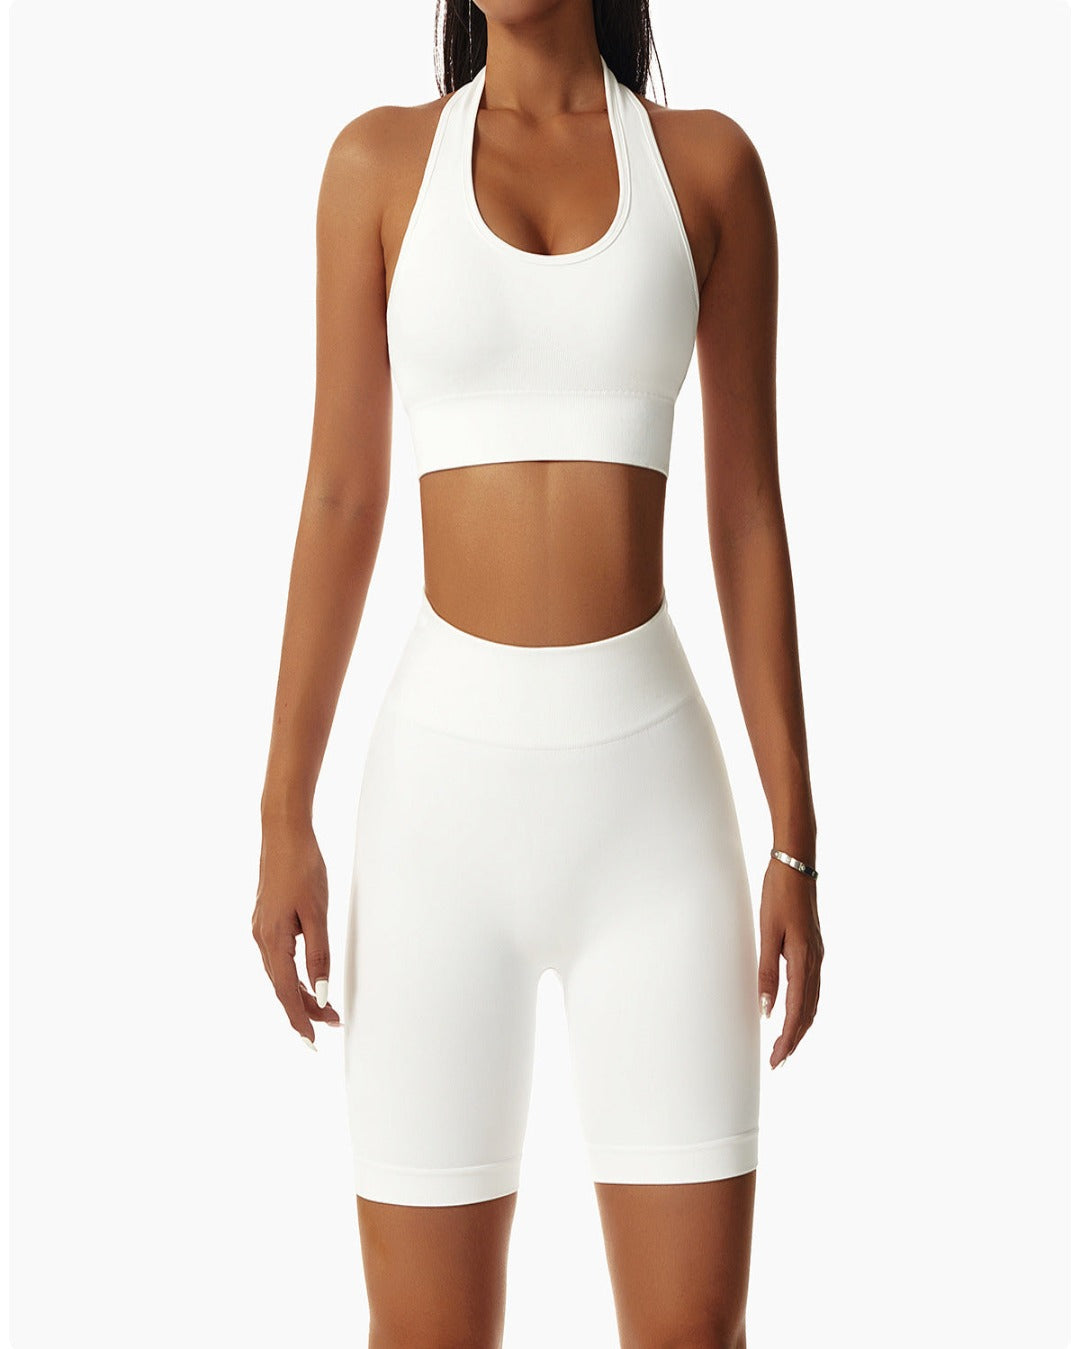 Oh Polly white halter backless sports bra Size XXS - $37 New With Tags -  From camryn